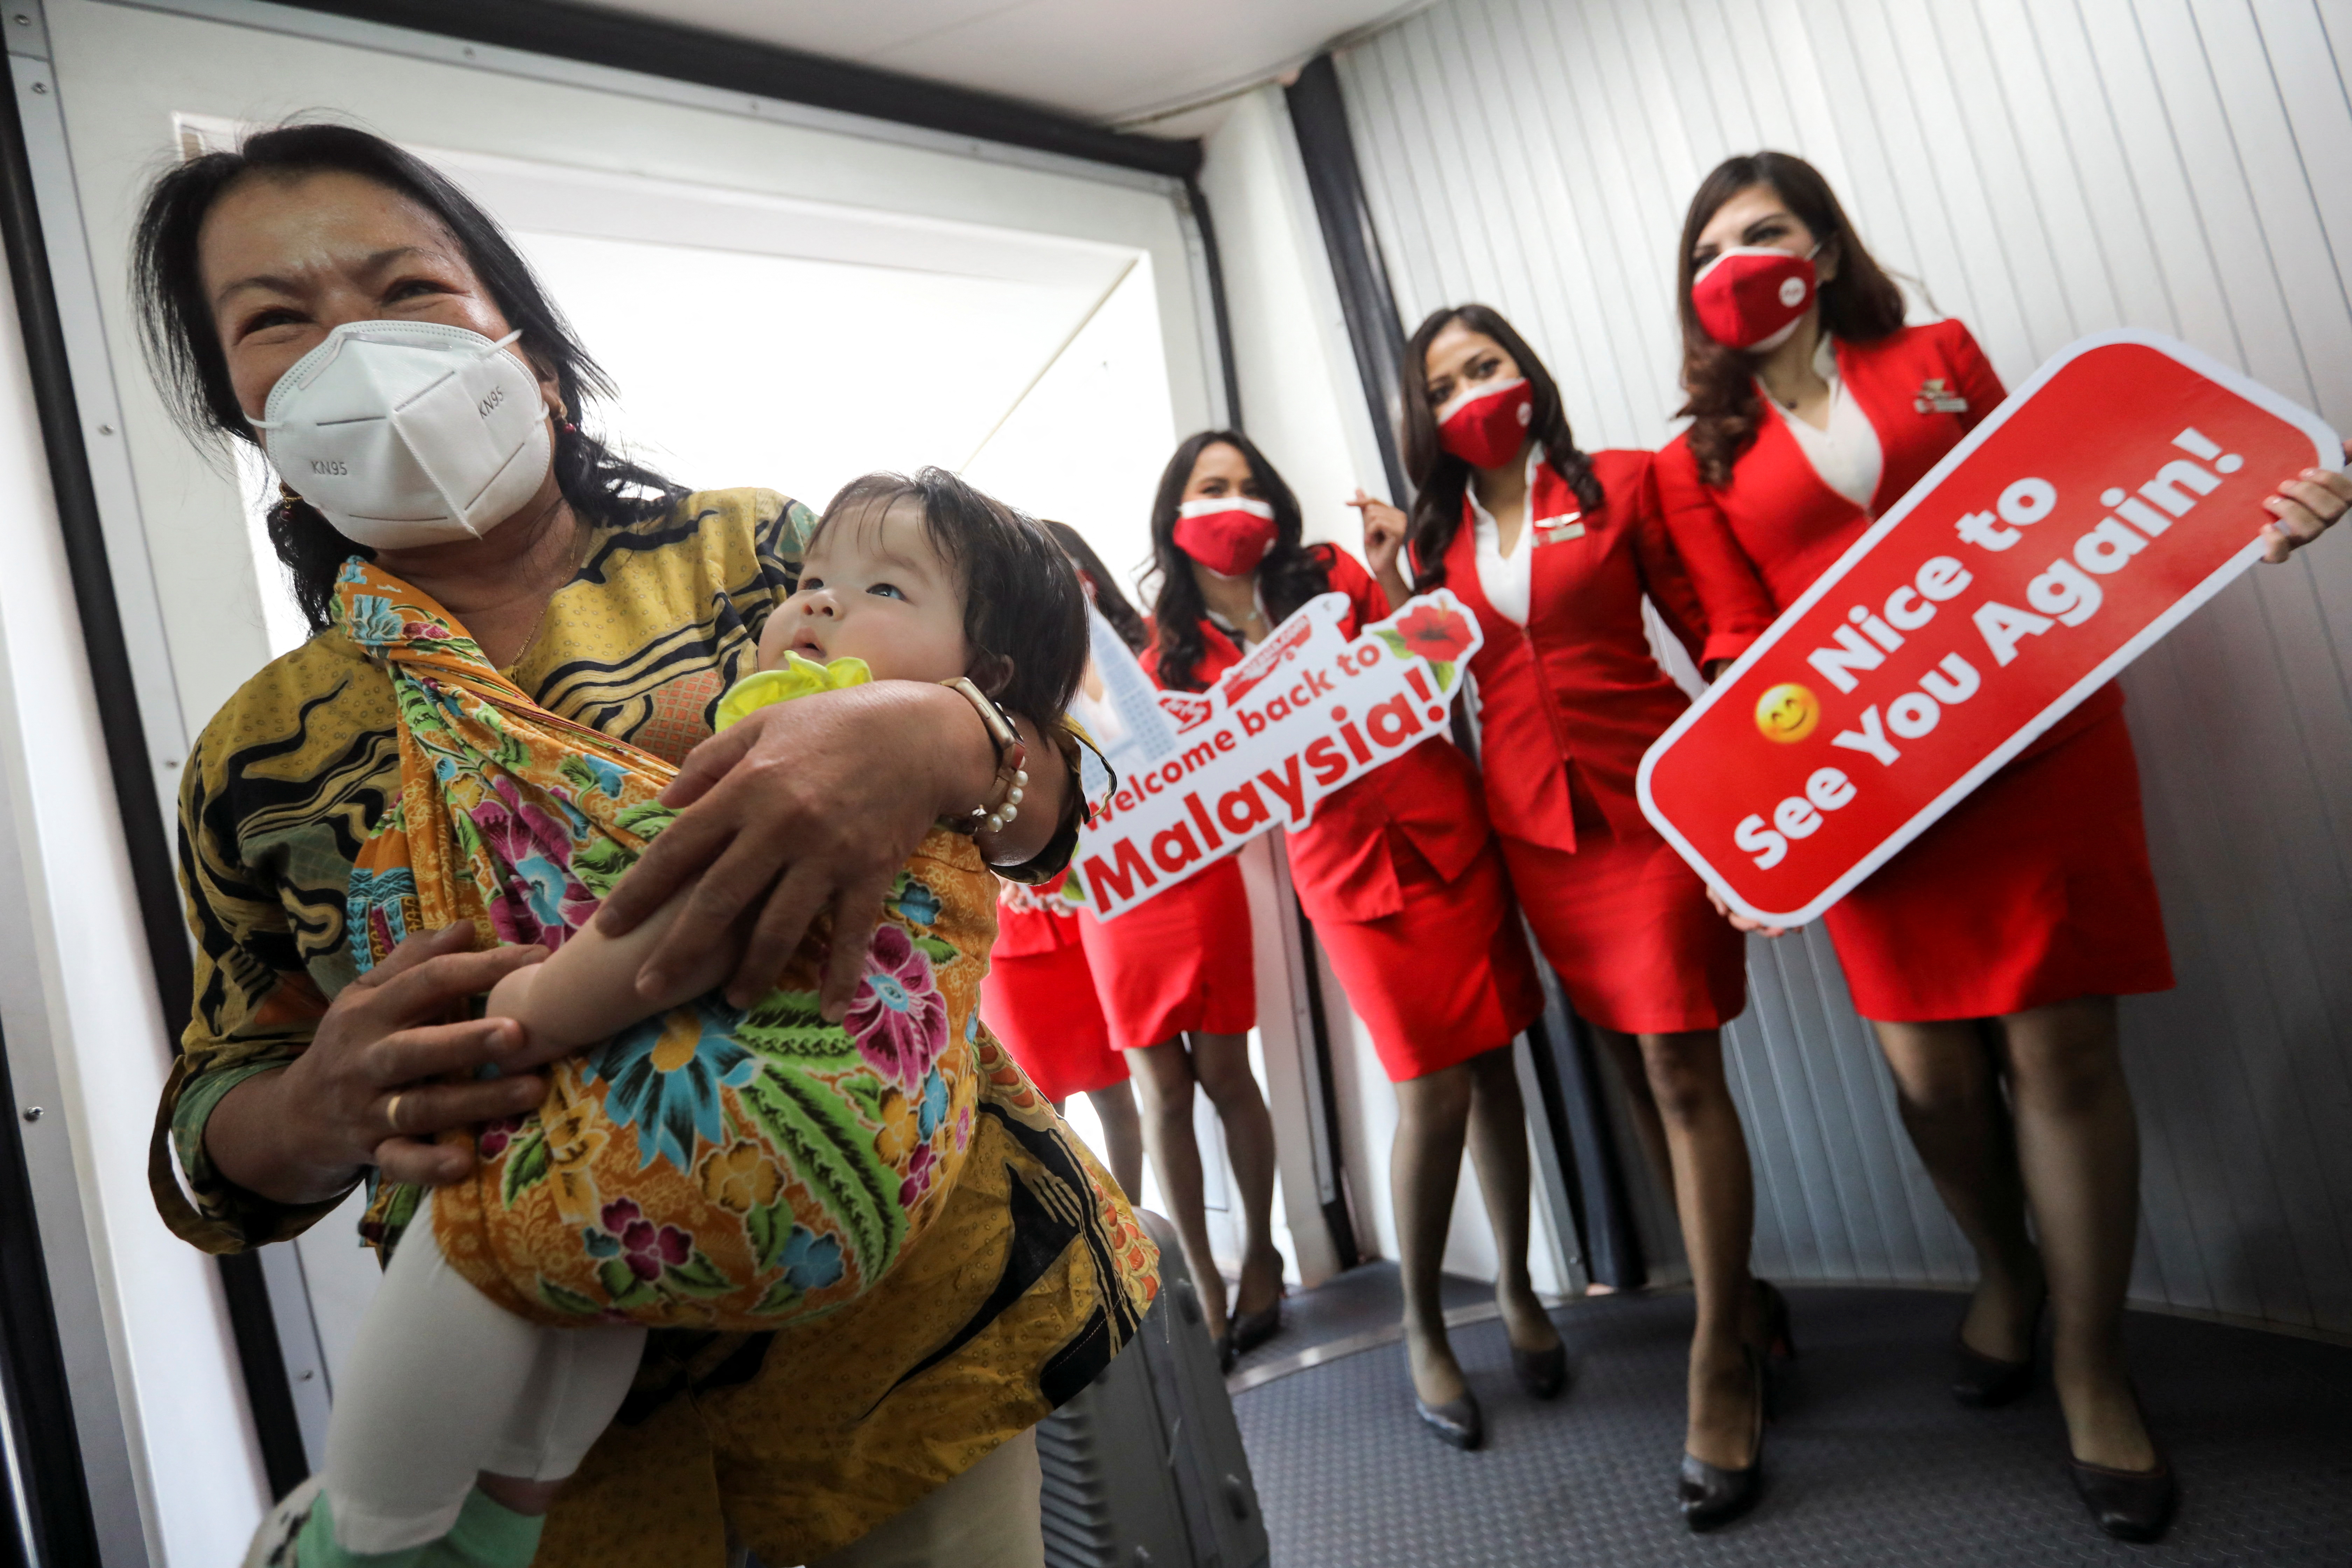 Stewardesses welcome a woman and toddler, as they disembark from an airplane from Jakarta, Indonesia at Kuala Lumpur International Airport 2 (KLIA2) in Sepang